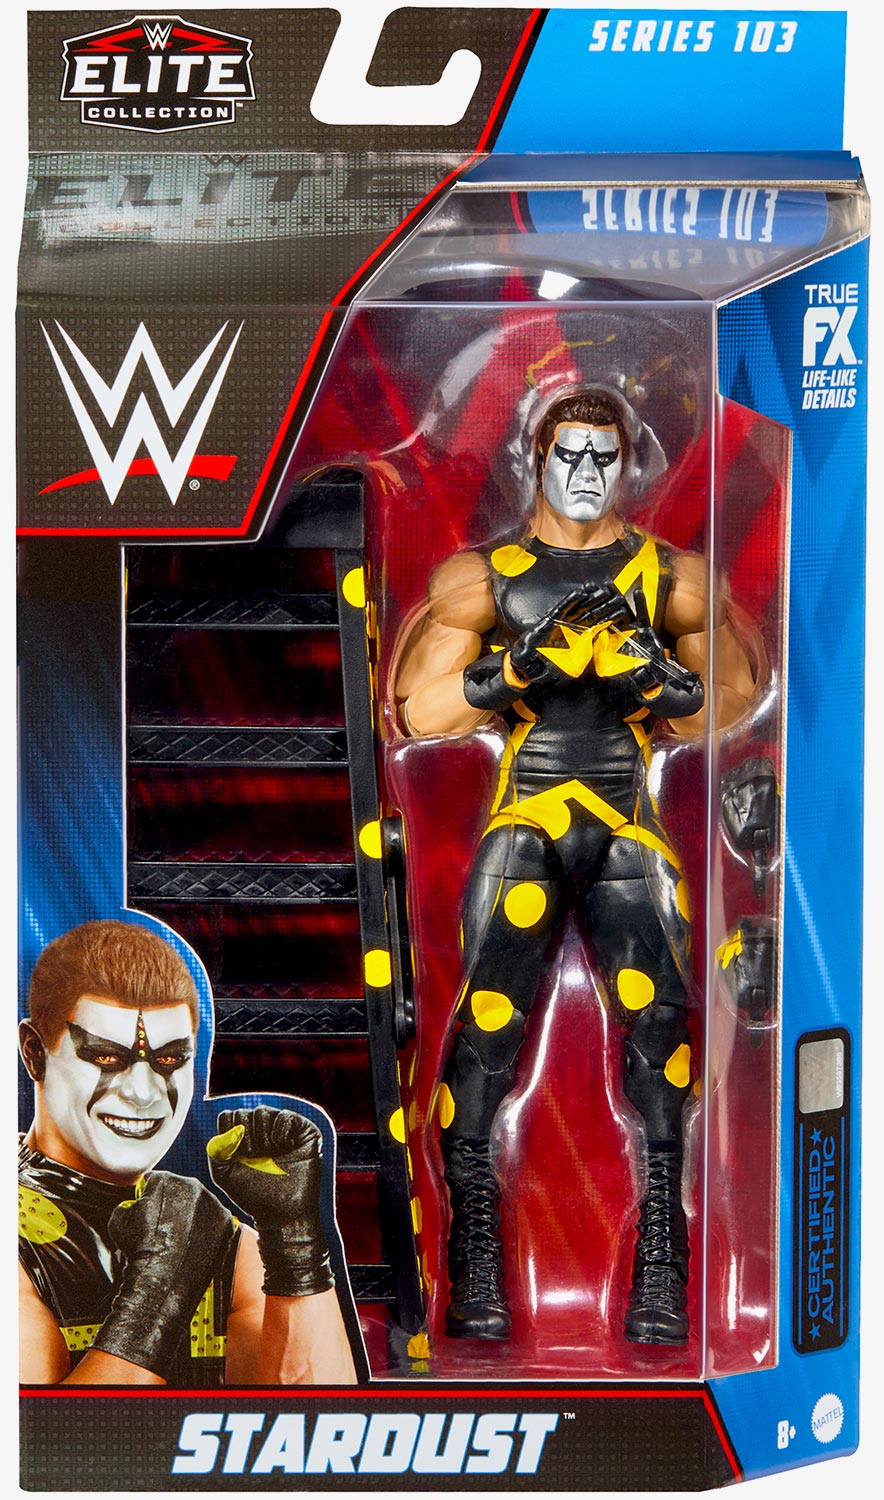 Stardust WWE Elite Collection Series #103